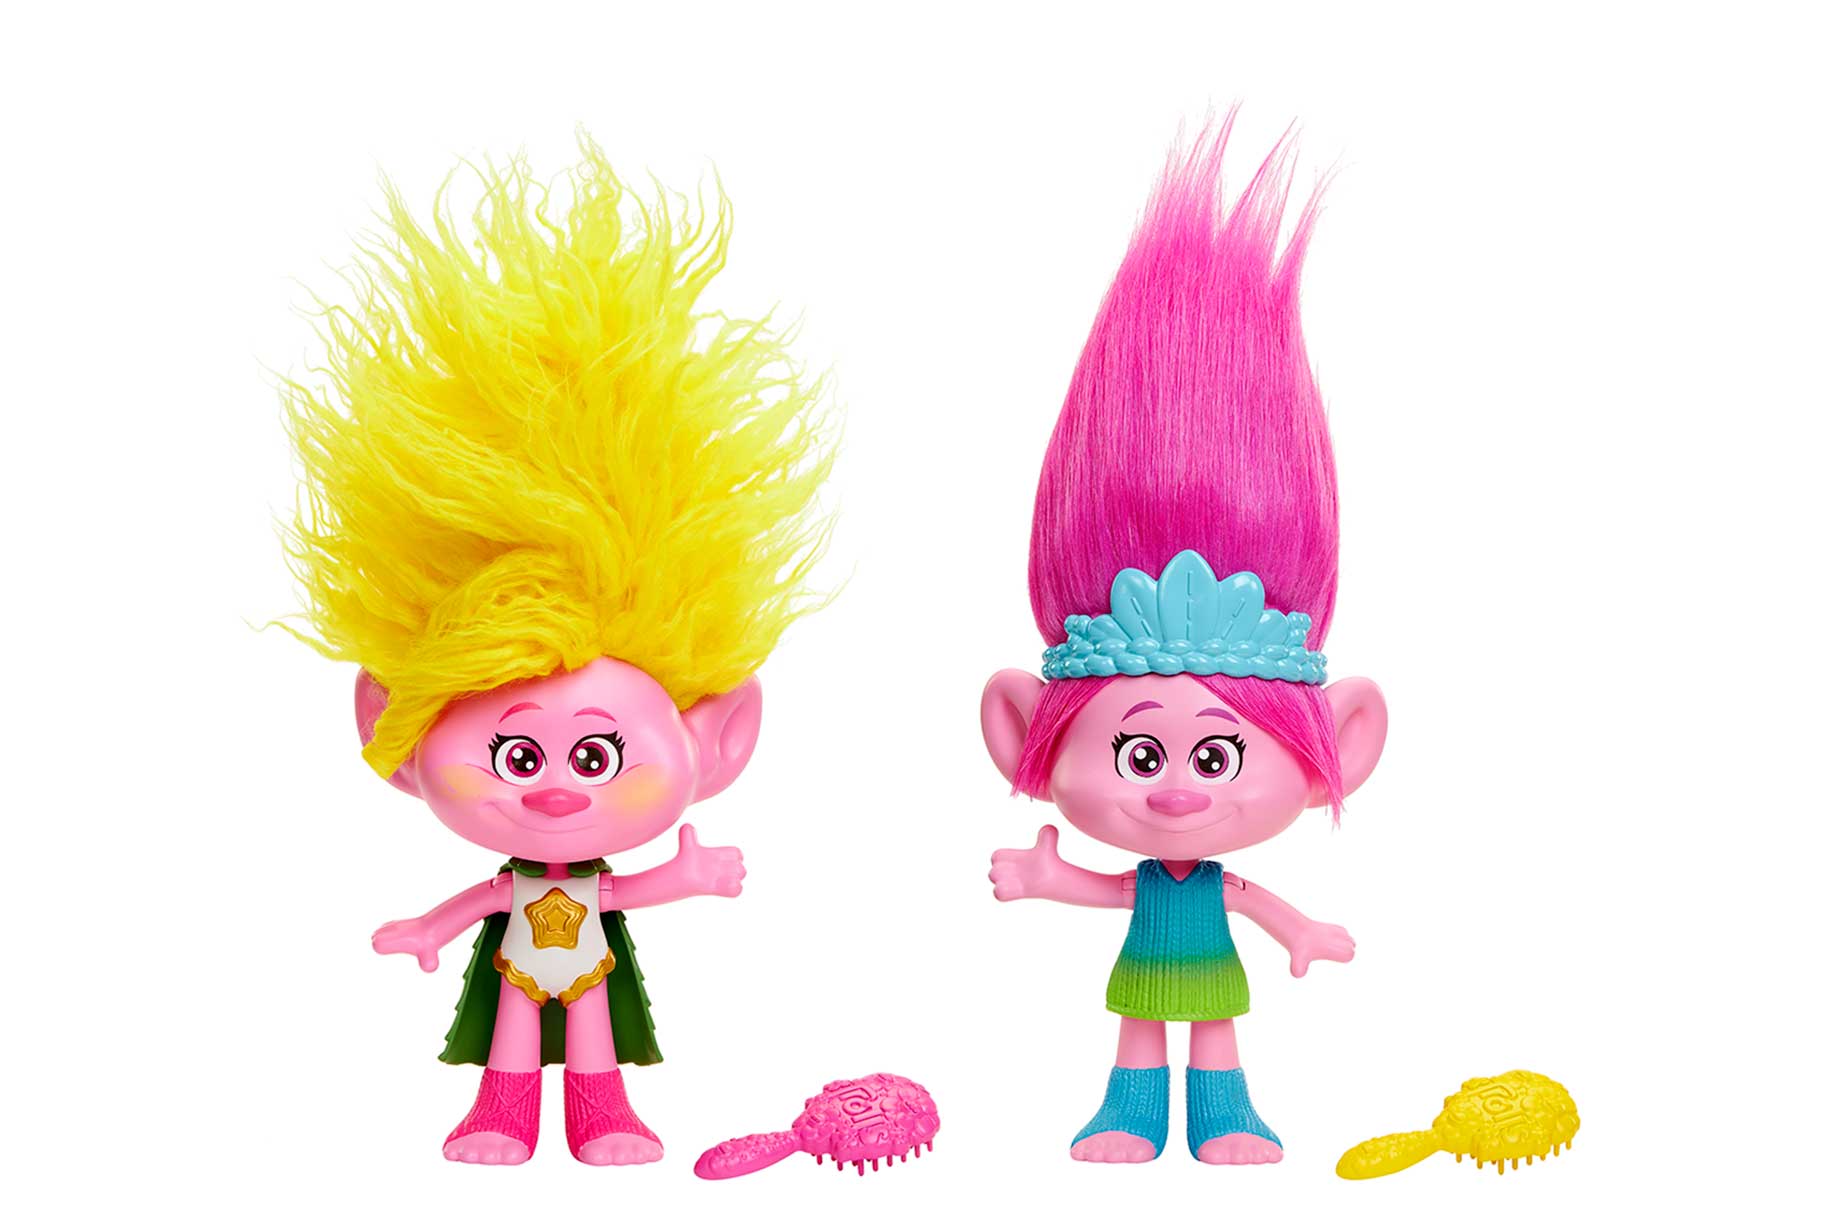 Two Trolls dolls one with yellow hair (L) one with pink hair (R) with accessories scattered next to them.